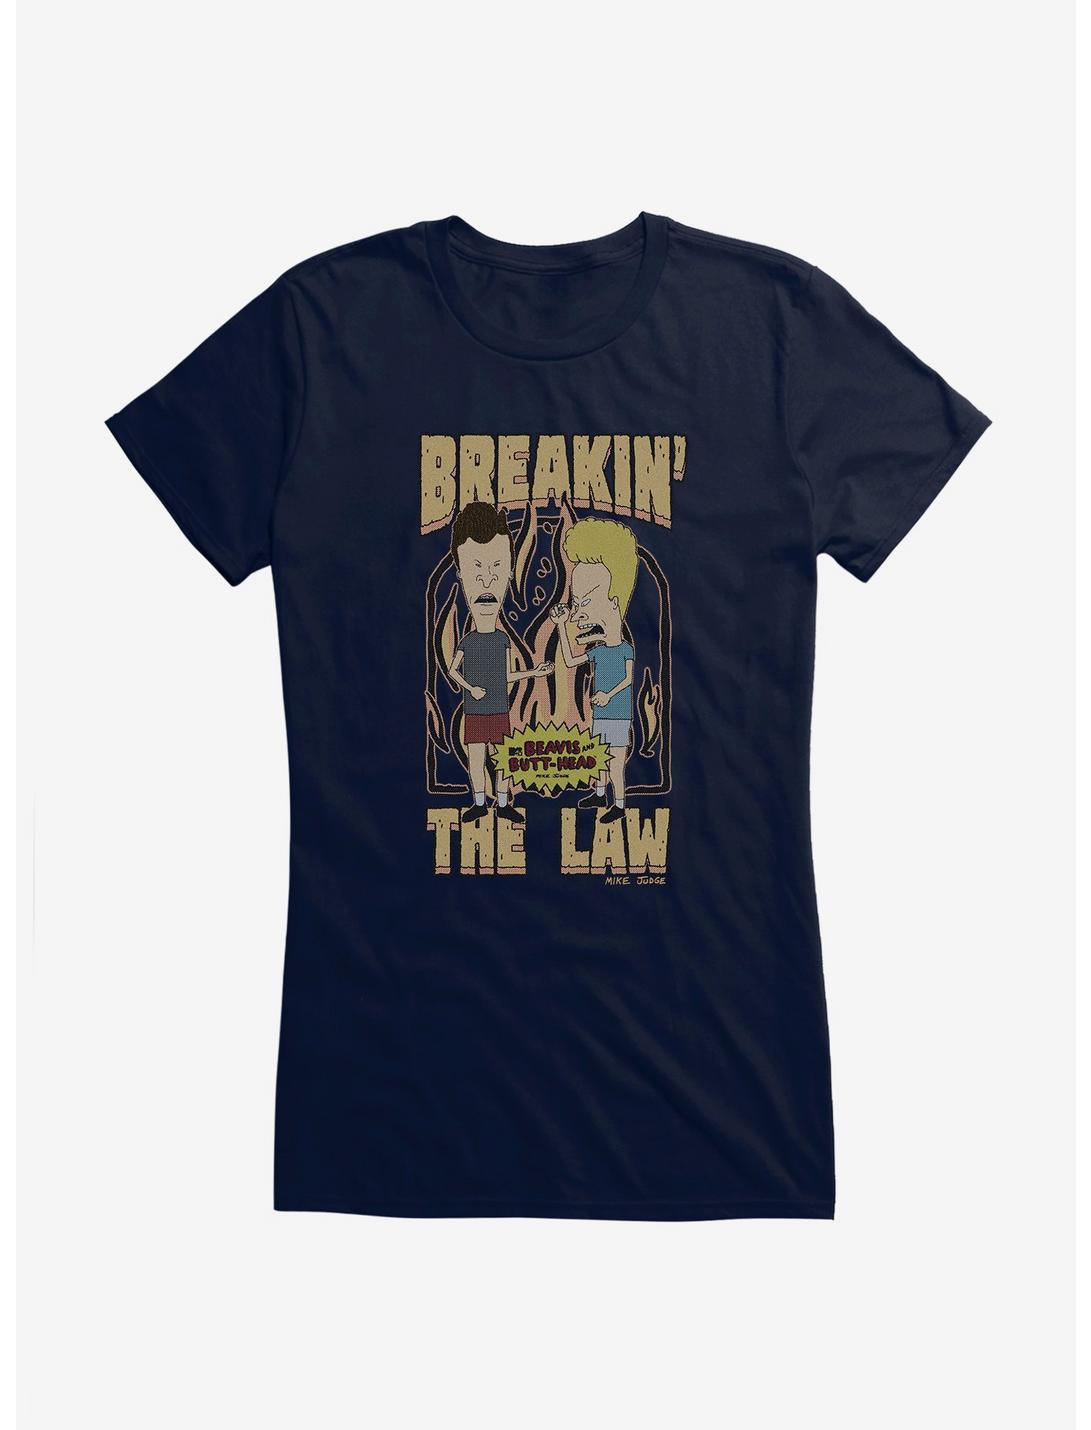 Beavis And Butthead Breakin The Law Girls T-Shirt, NAVY, hi-res